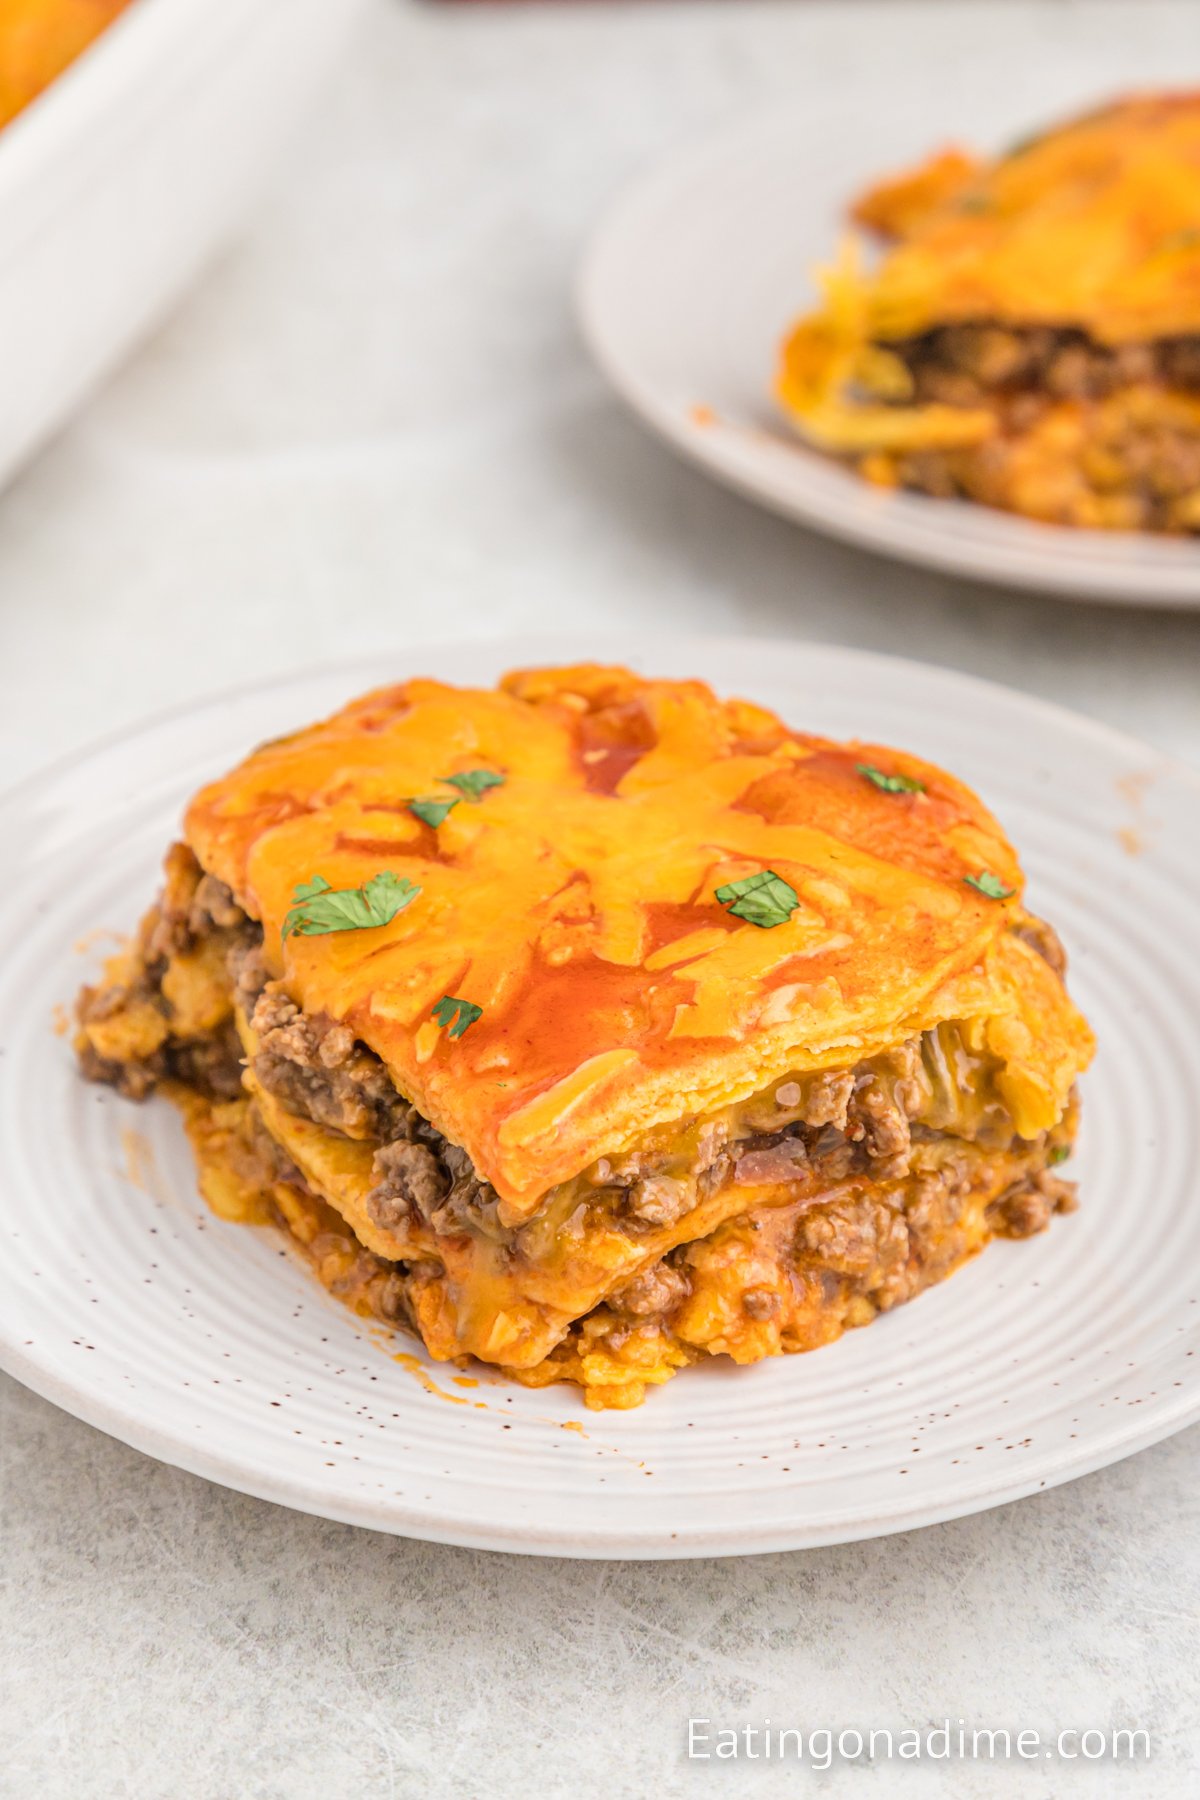 A close up image of a serving of beef enchilada casserole on a white plate